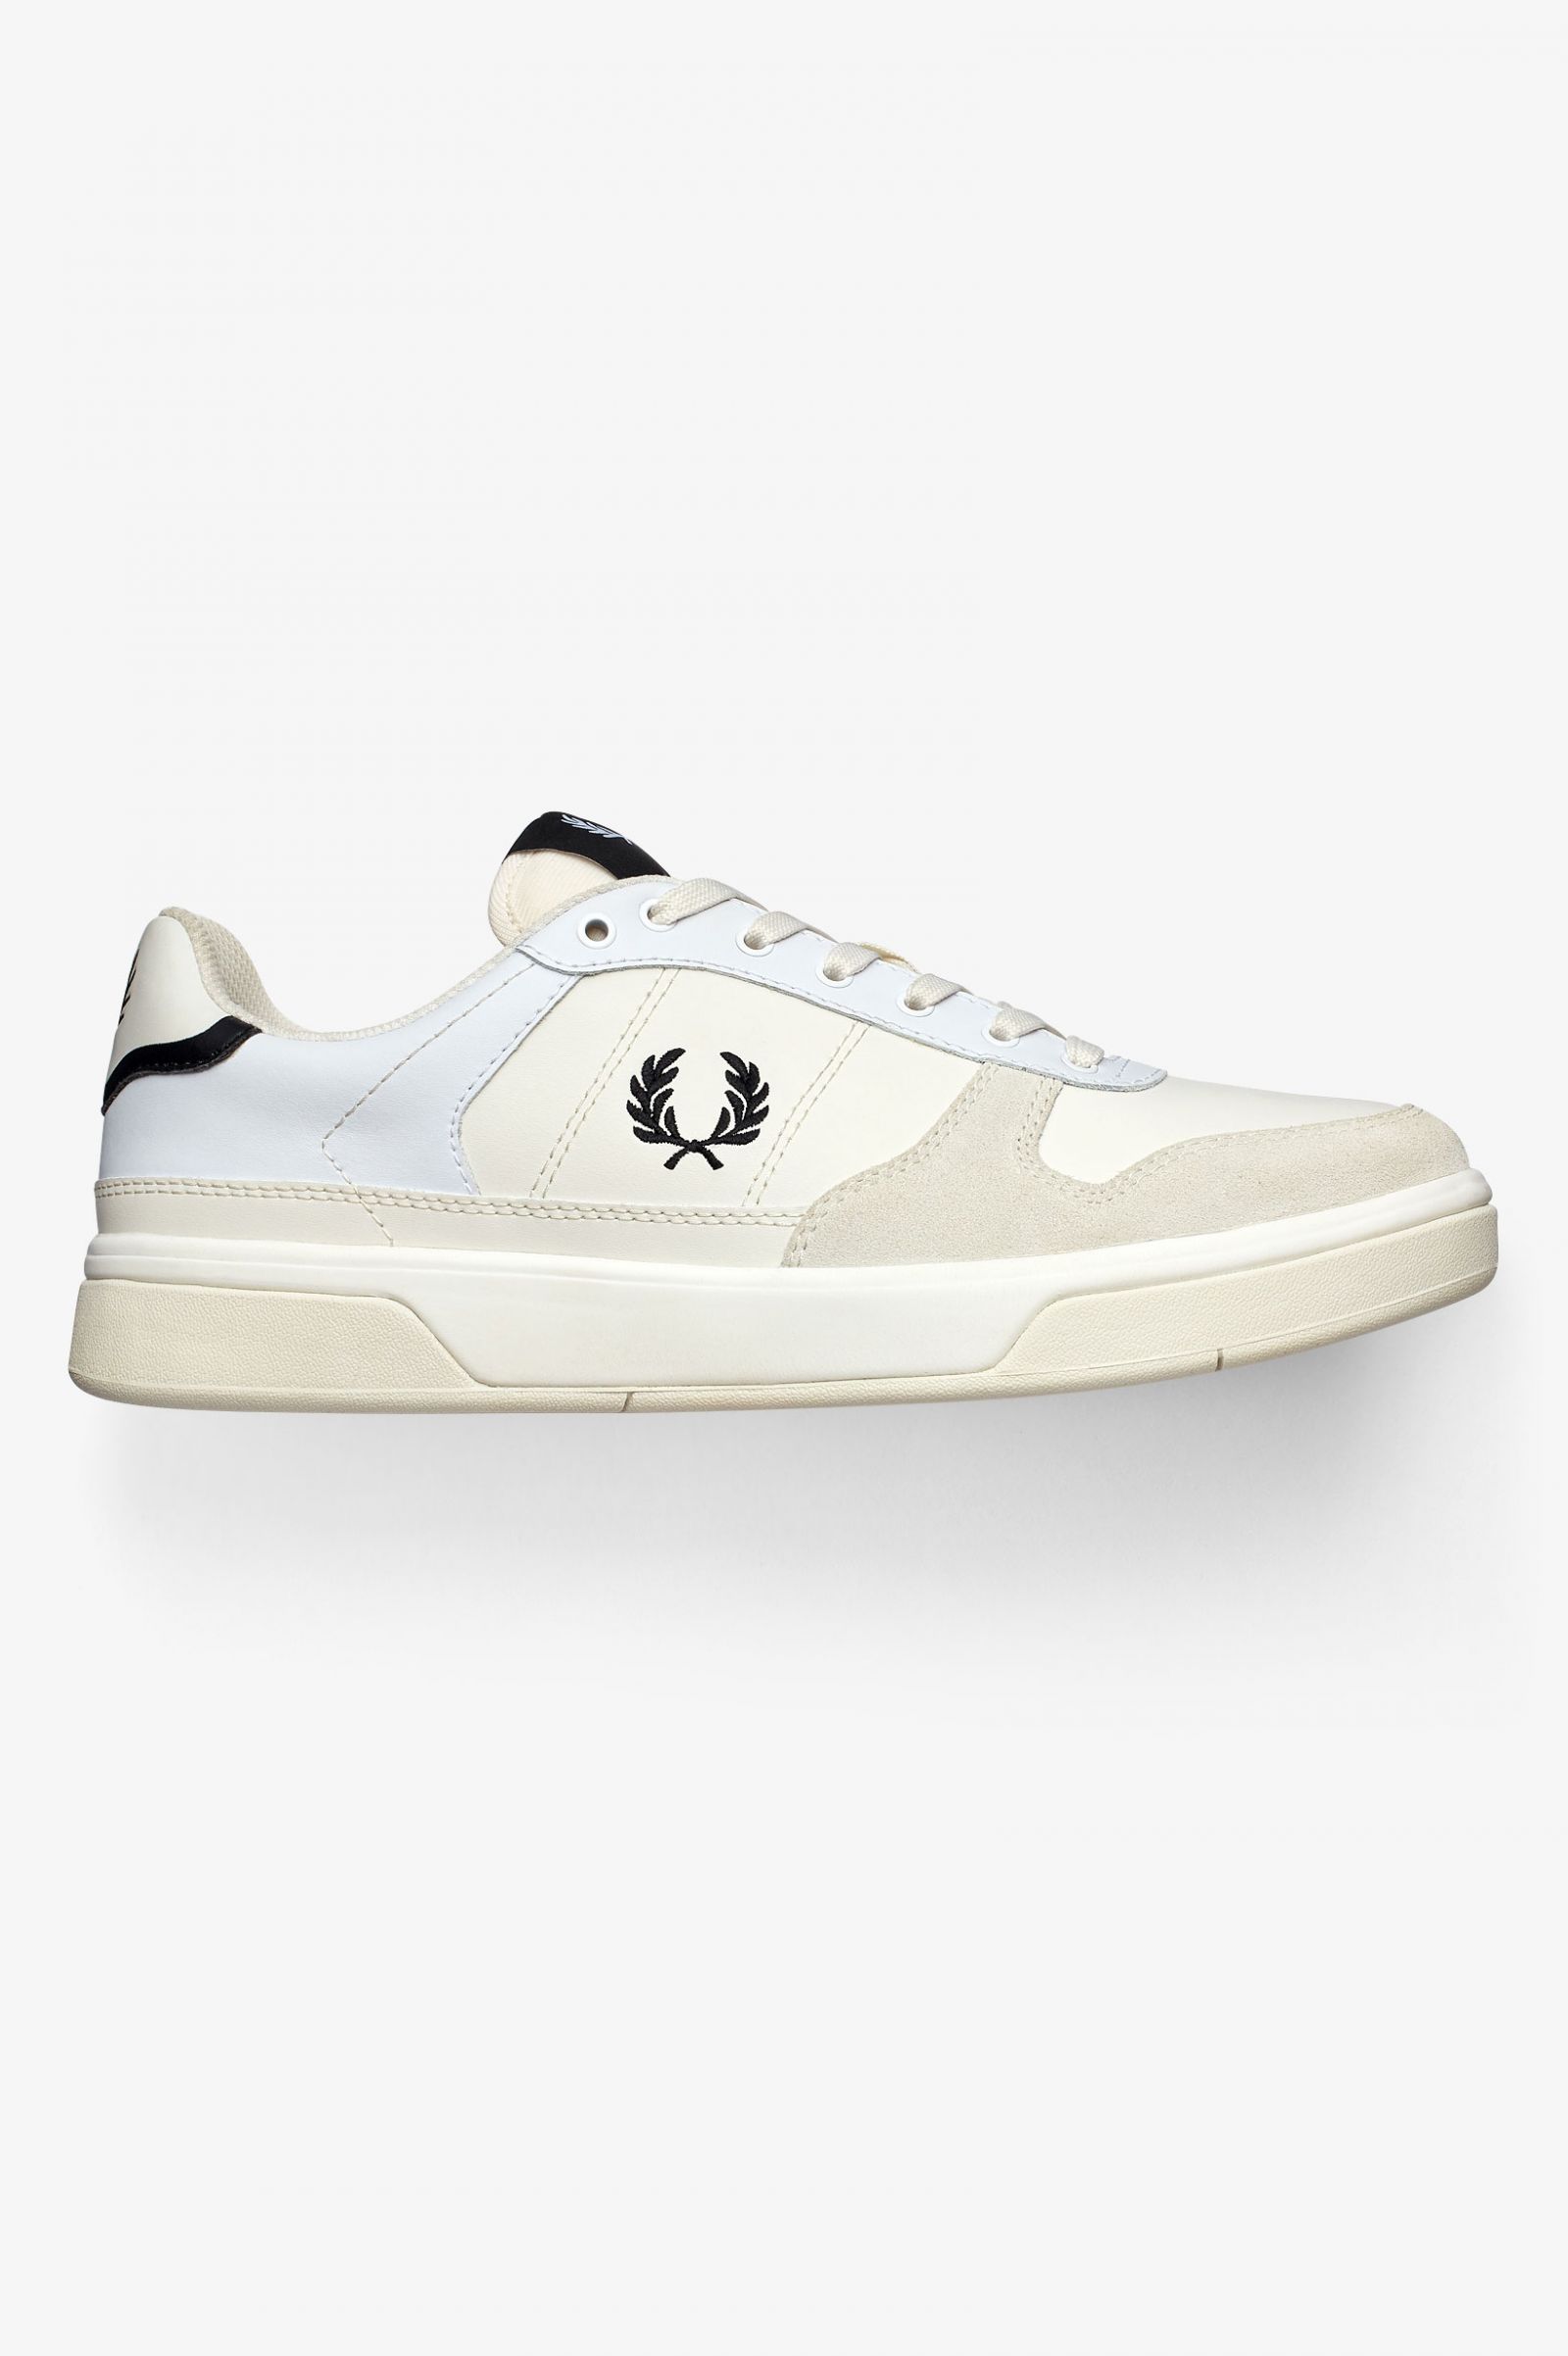 fred and perry shoes